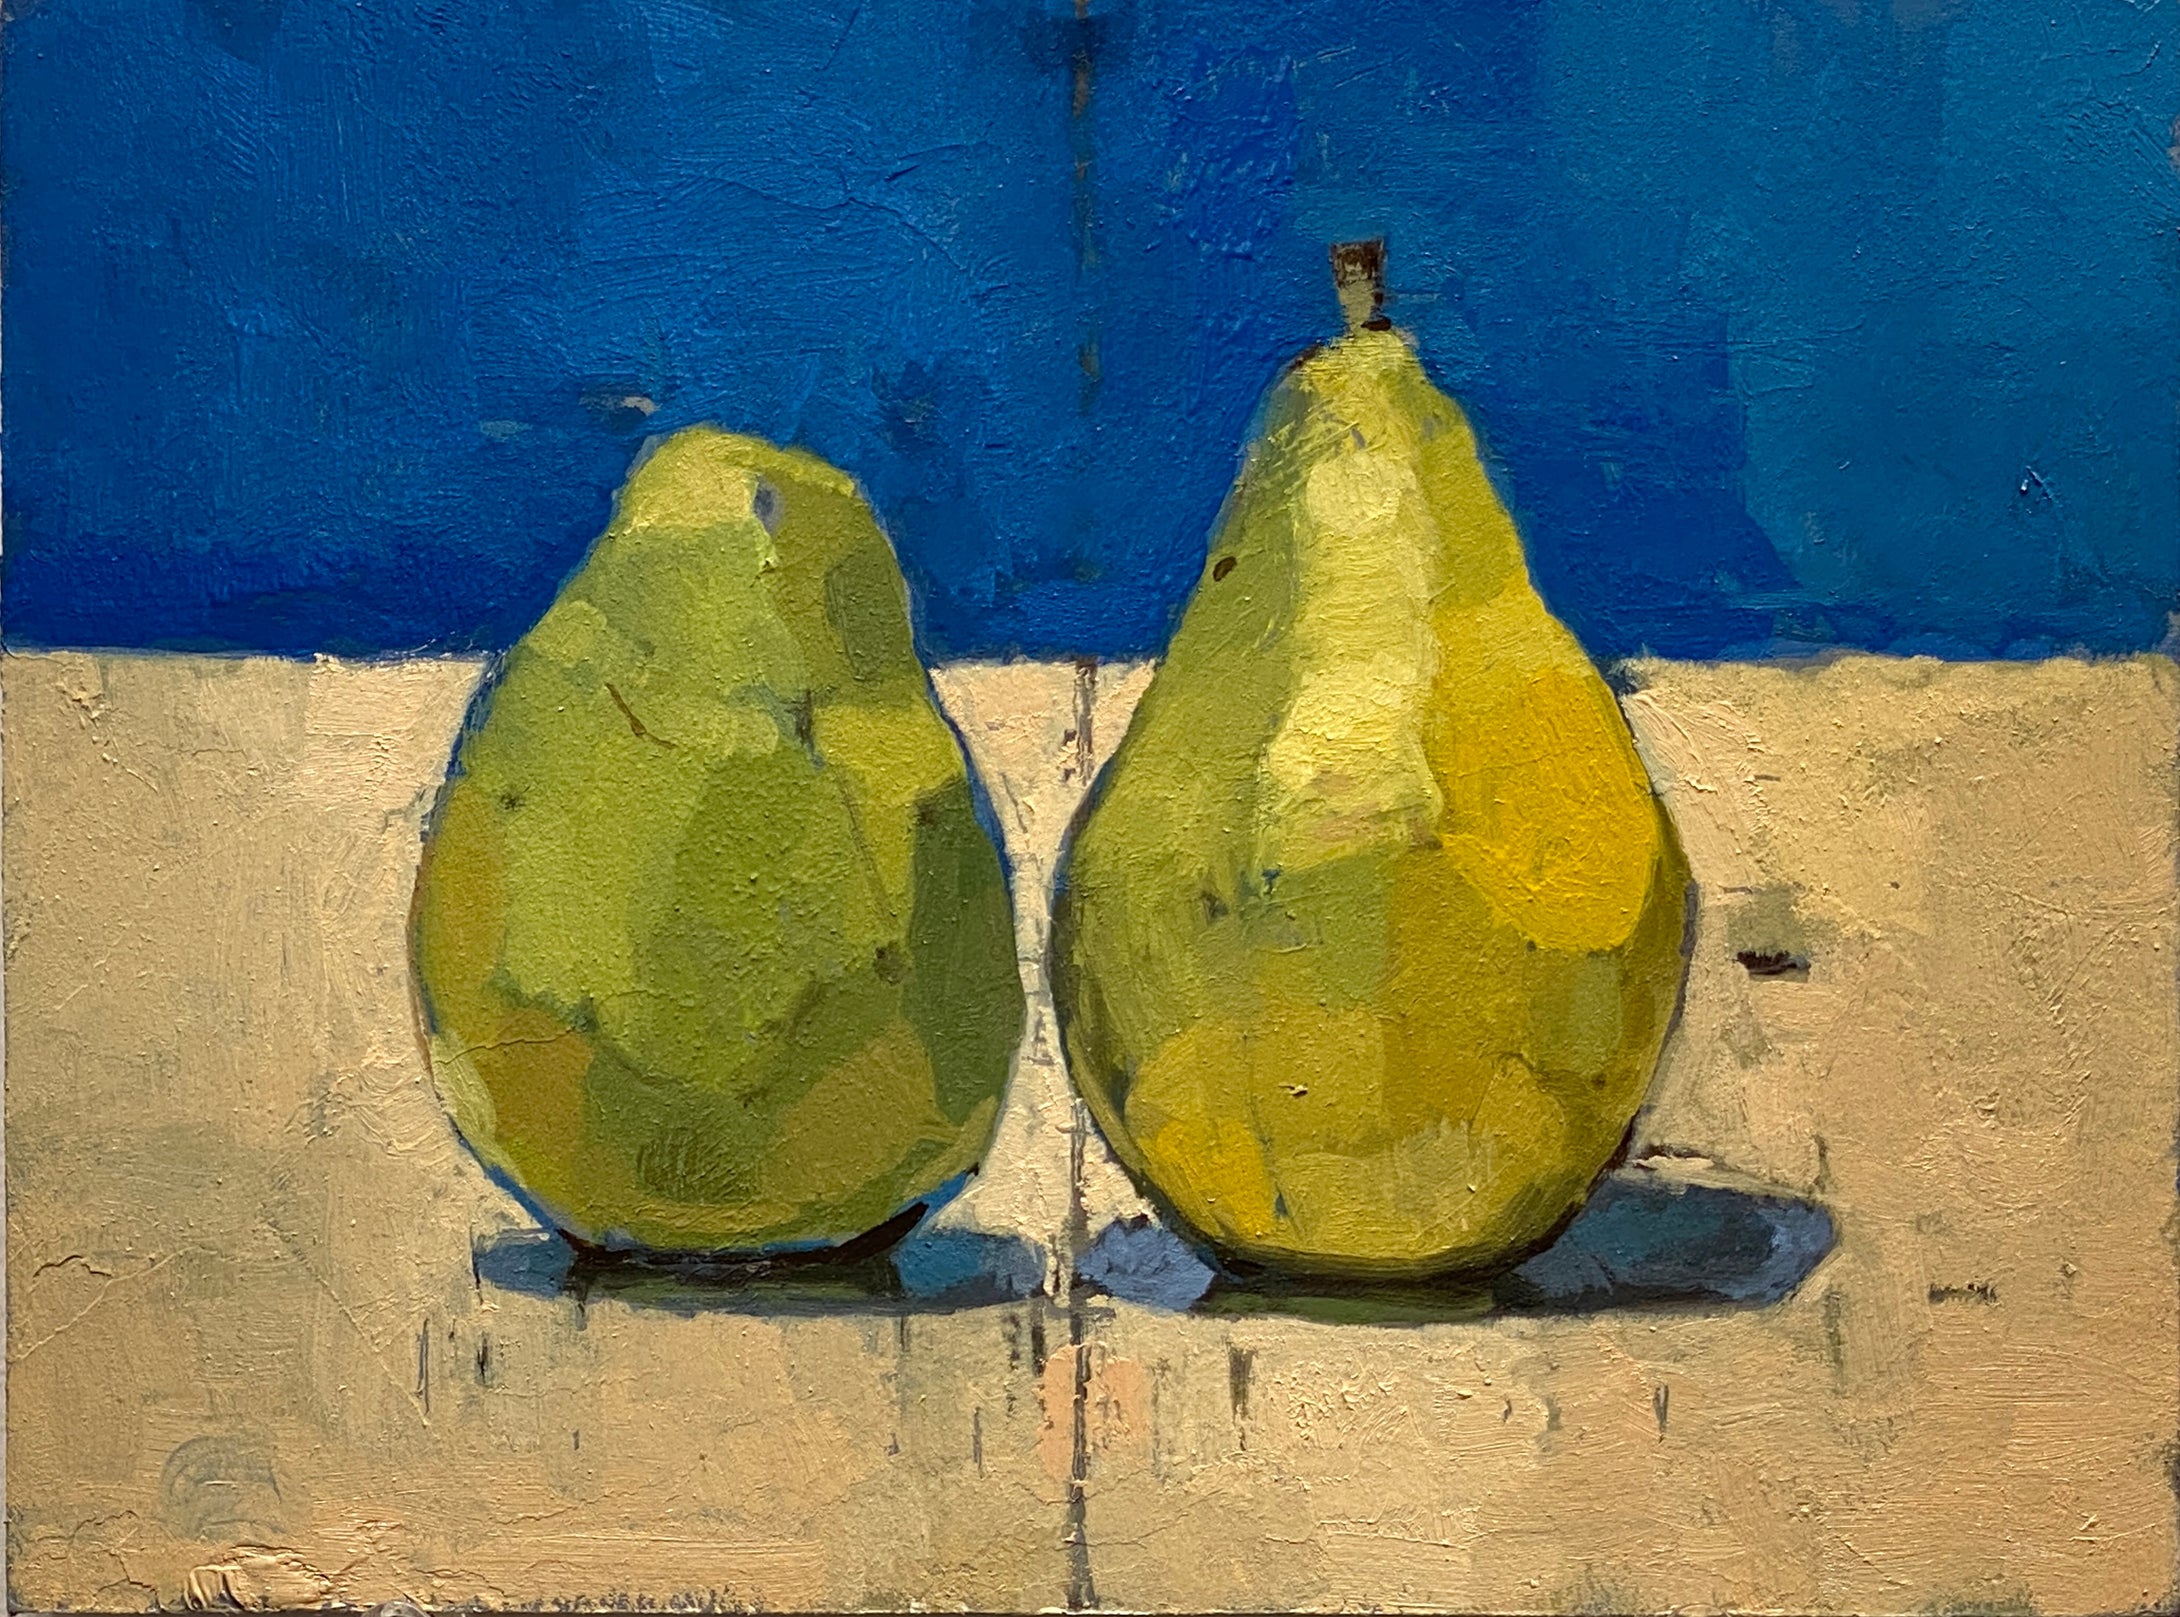 Two counterfeit pears (after Uglow)